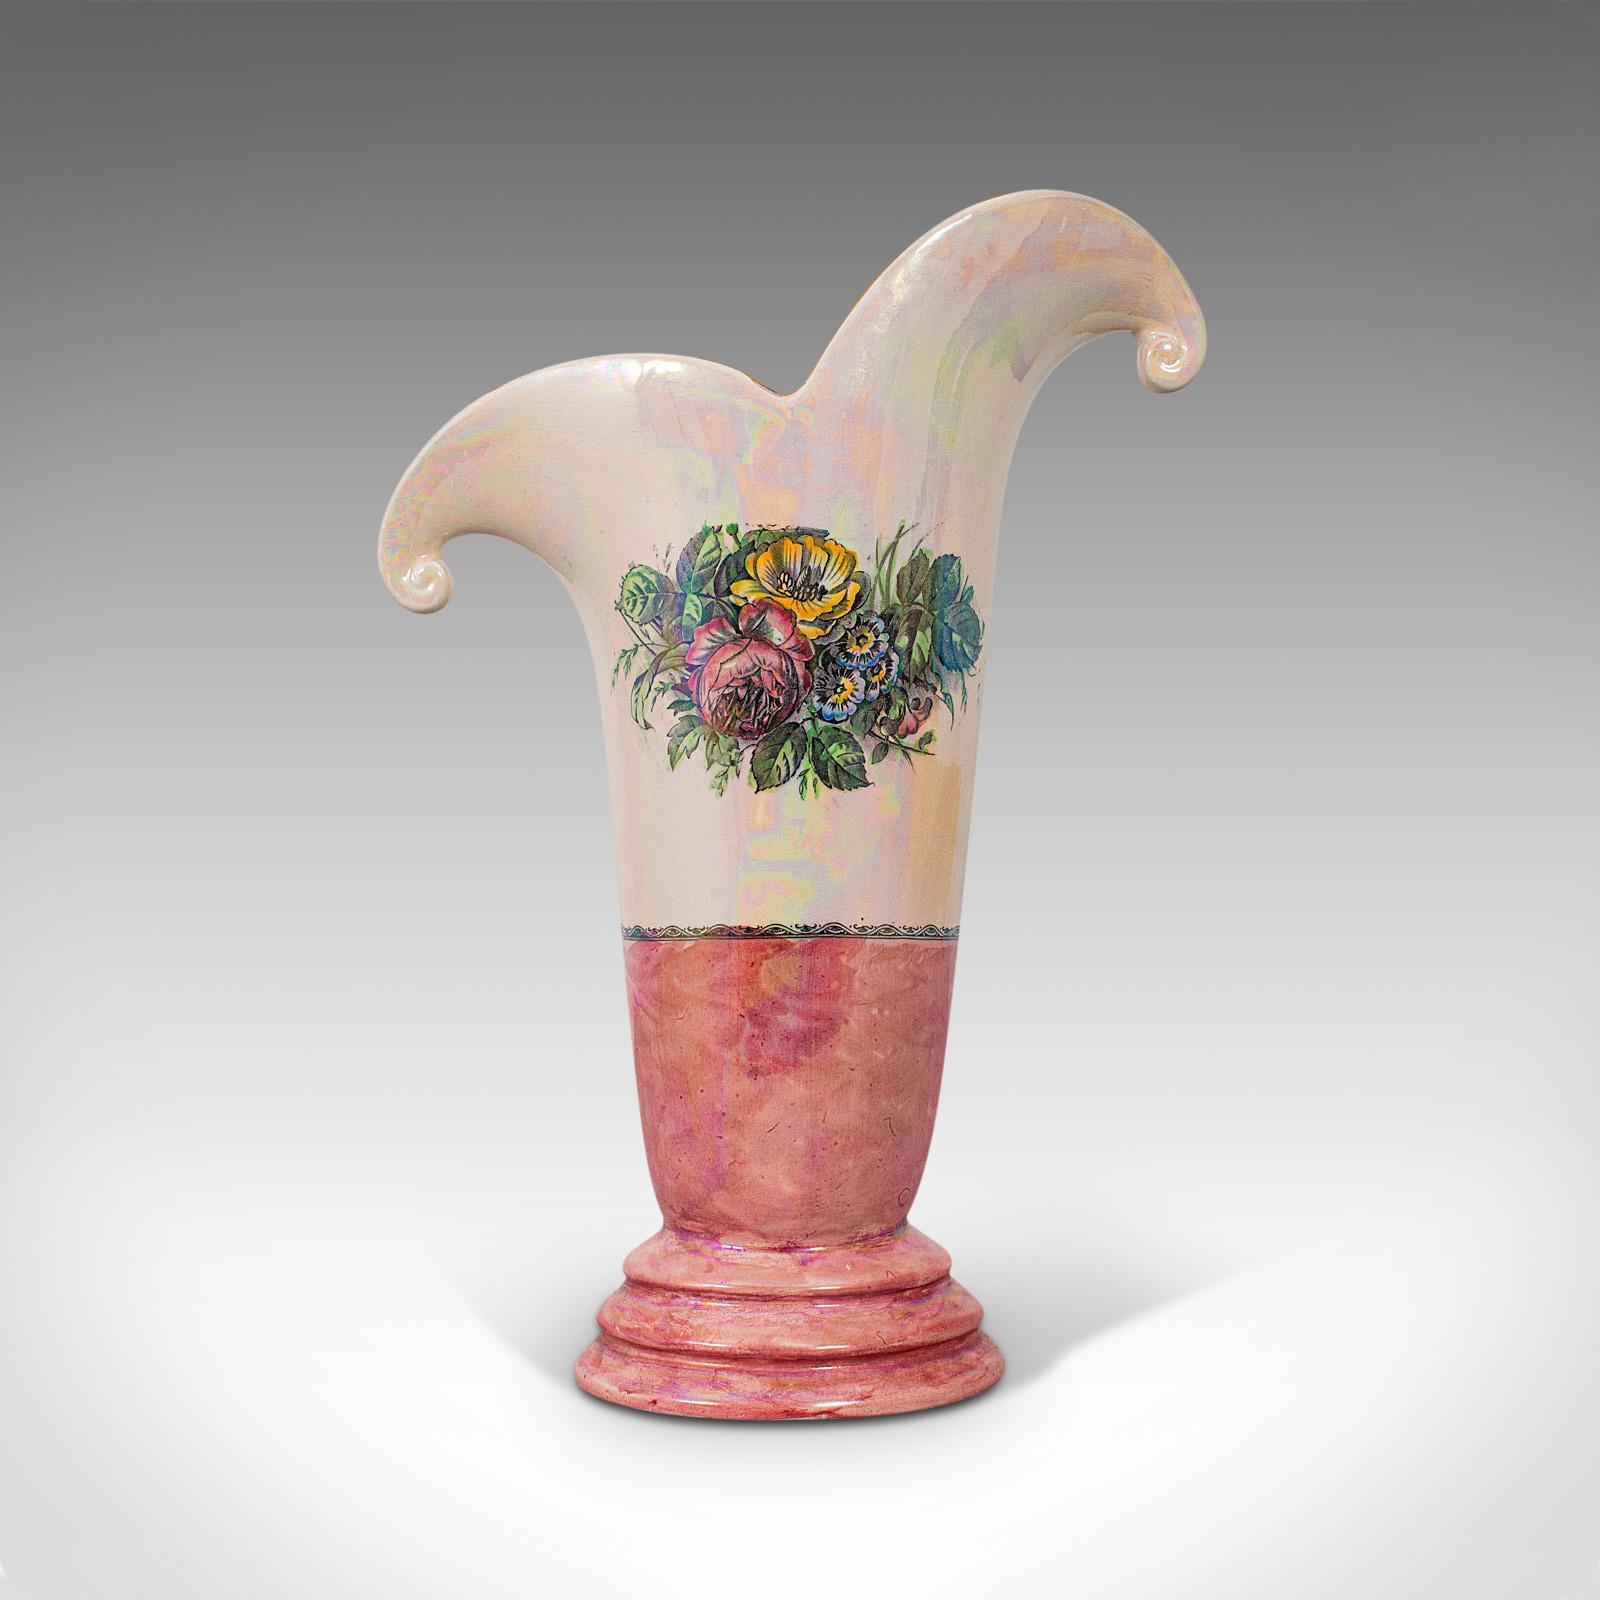 This is a tall vintage decorative vase. An English, ceramic collectible vase with profuse lustre finish, dating to the mid-20th century, circa 1950.

Alluring, striking lustre to catch admiring glances
Displays a desirable aged patina - in good